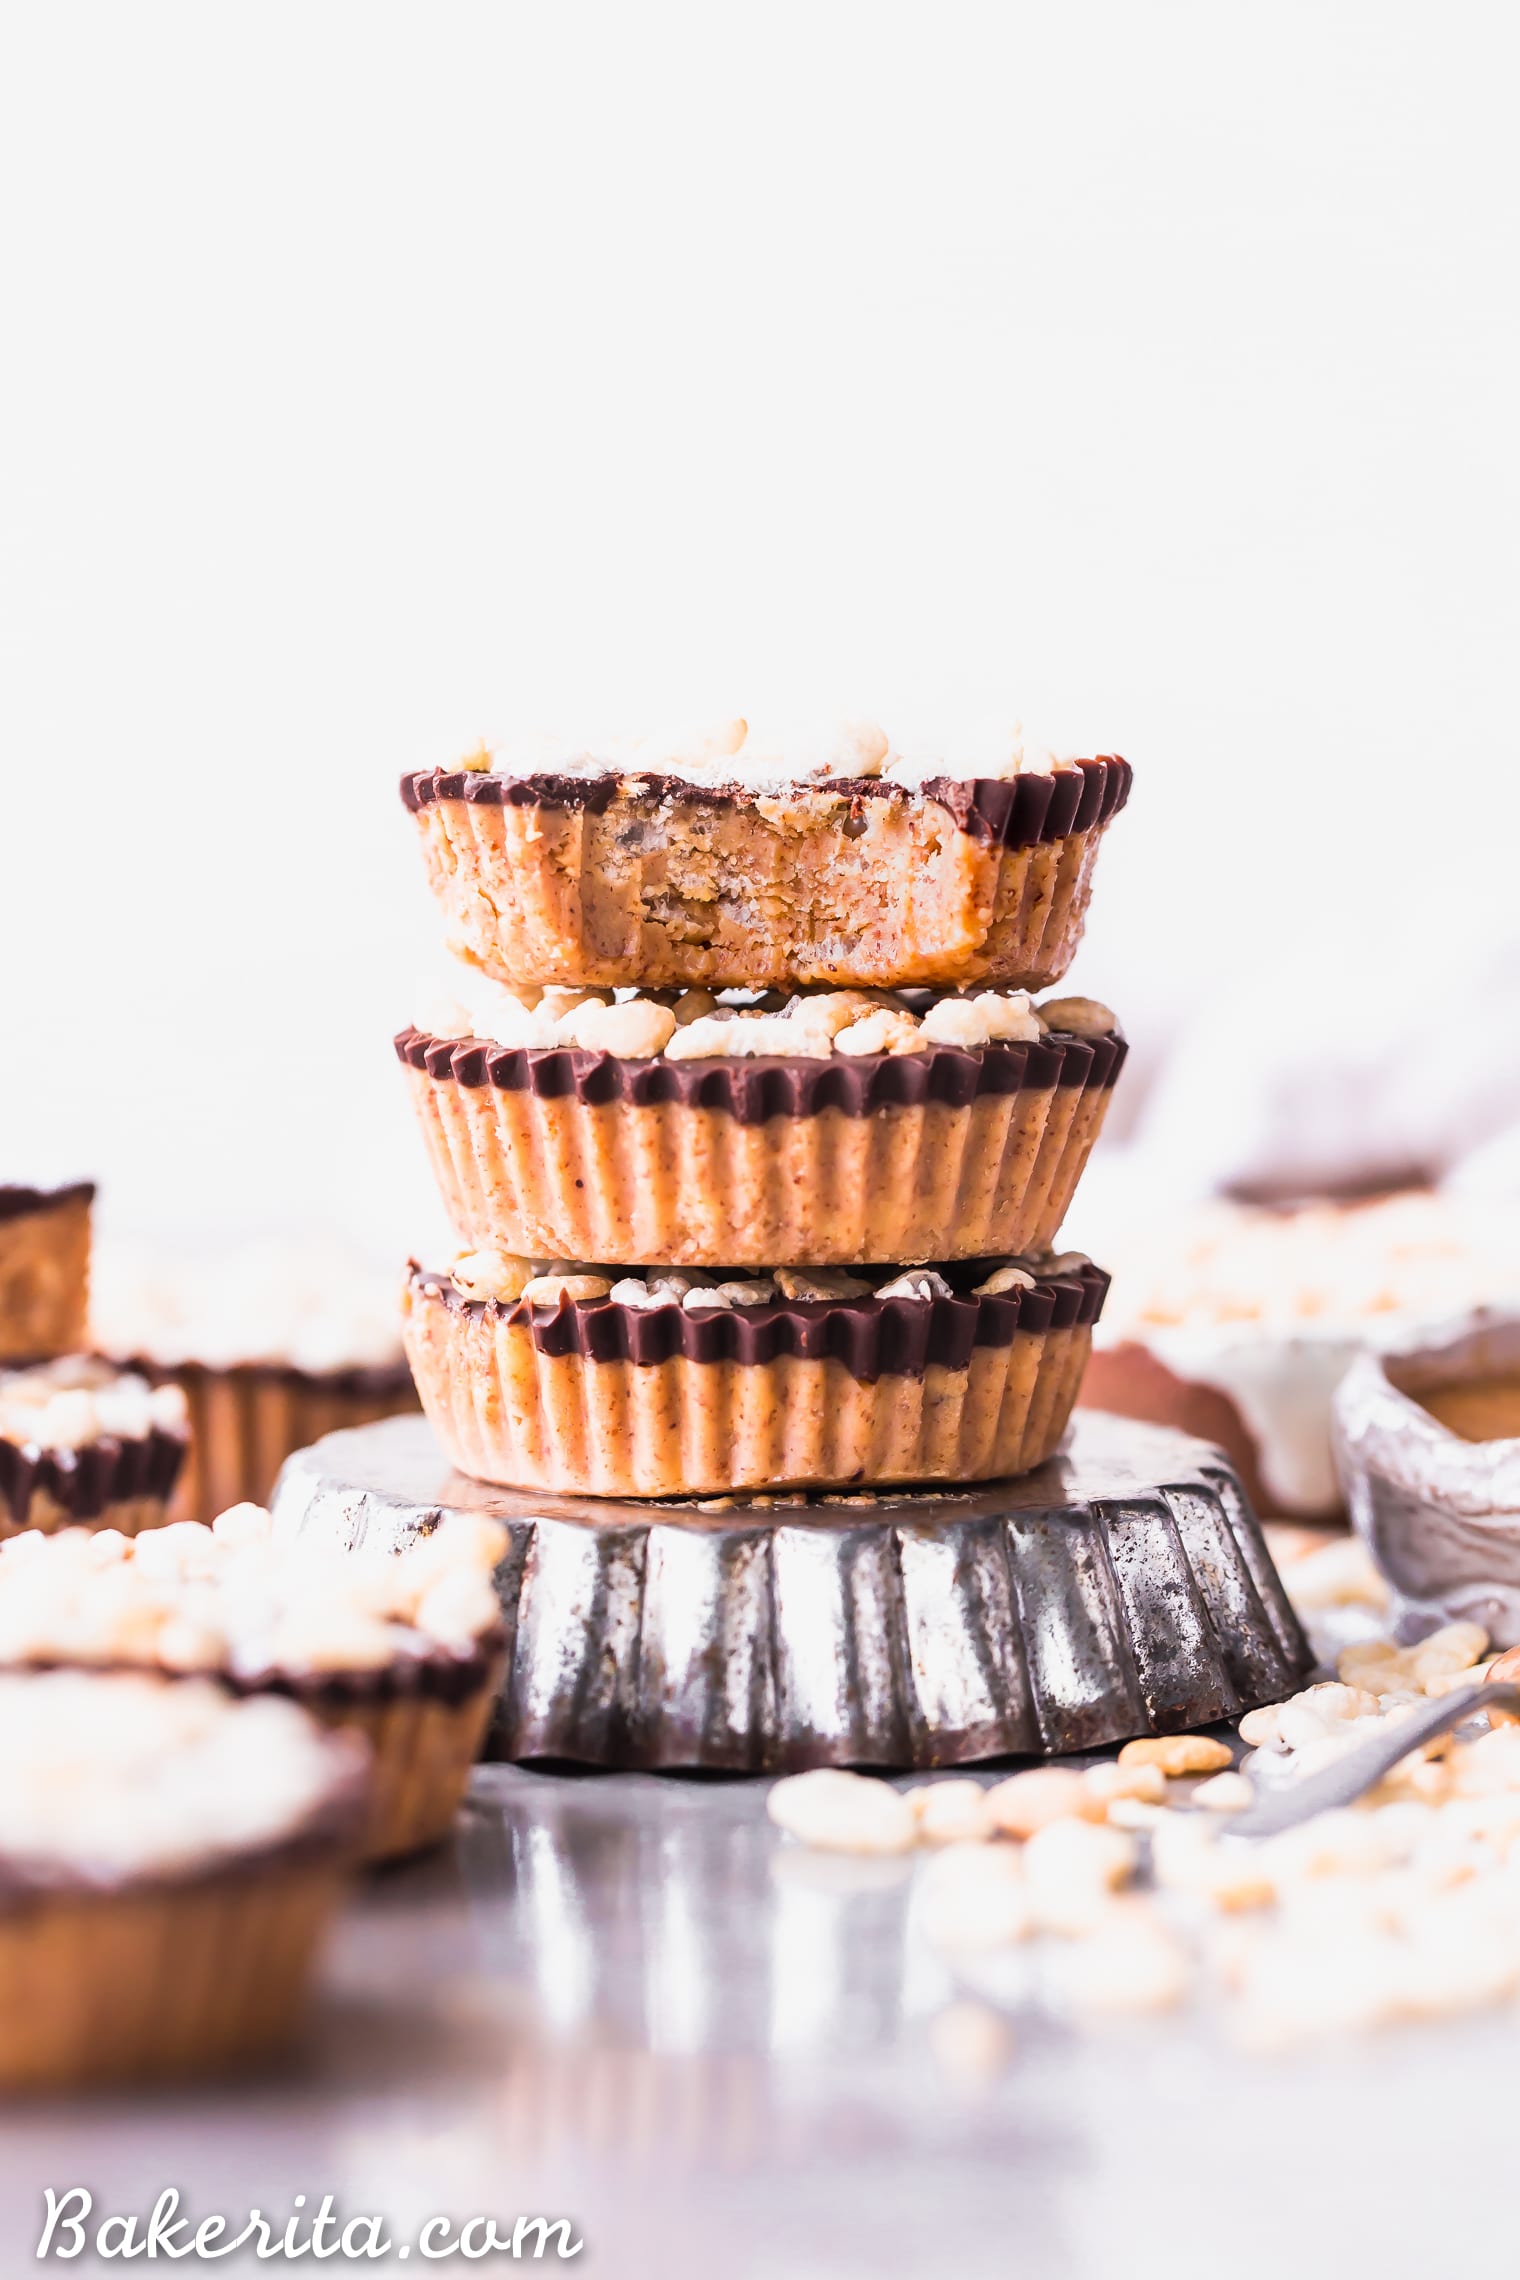 These No-Bake Crispy Chocolate Almond Butter Cups are rich, decadent, and so delicious, with a crispy almond butter layer topped with dark chocolate. The crisp comes from crispy brown rice cereal! You'd never guess these almond butter cups were gluten-free, refined sugar-free, and vegan. 